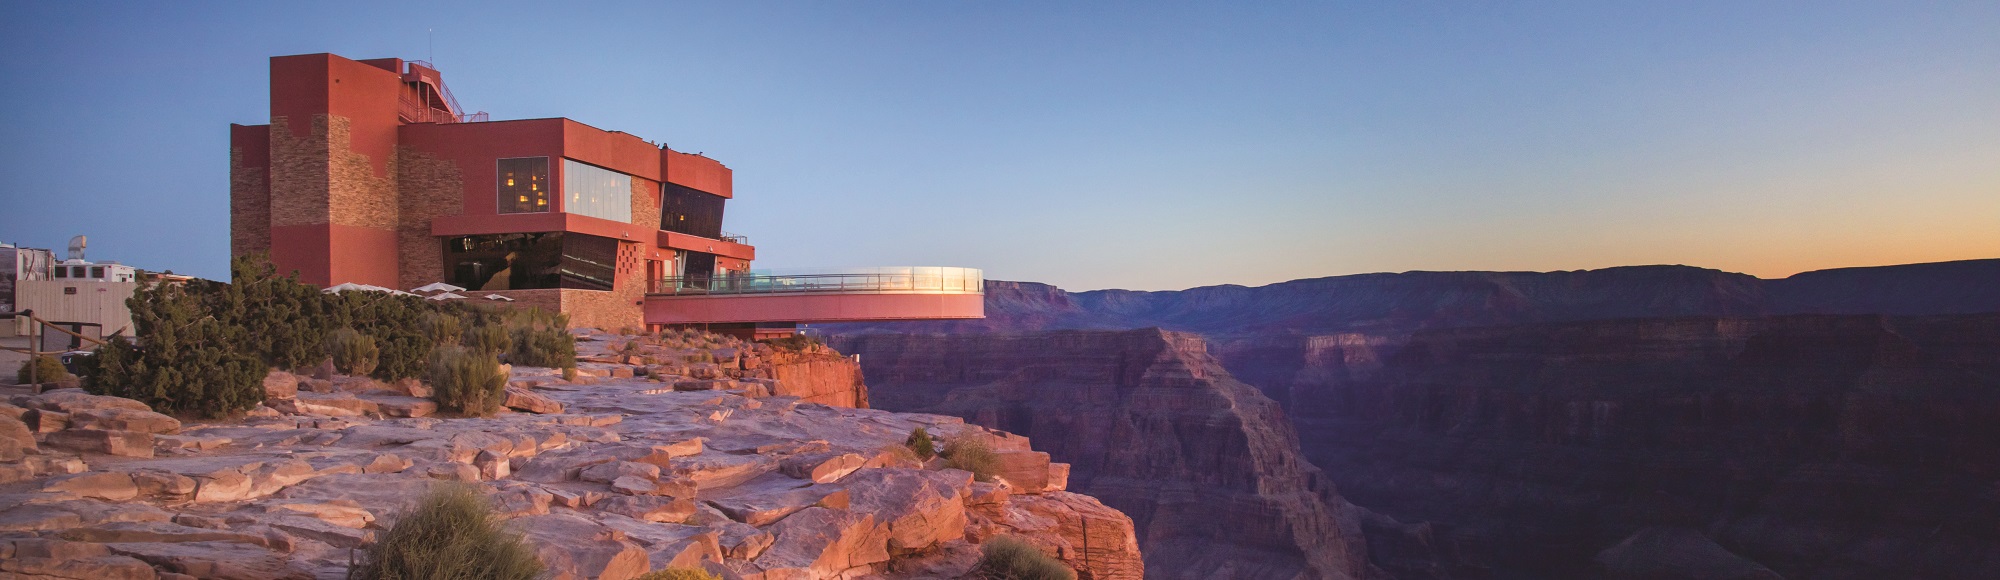 Grand Canyon West Admission - Grand Canyon West Skywalk